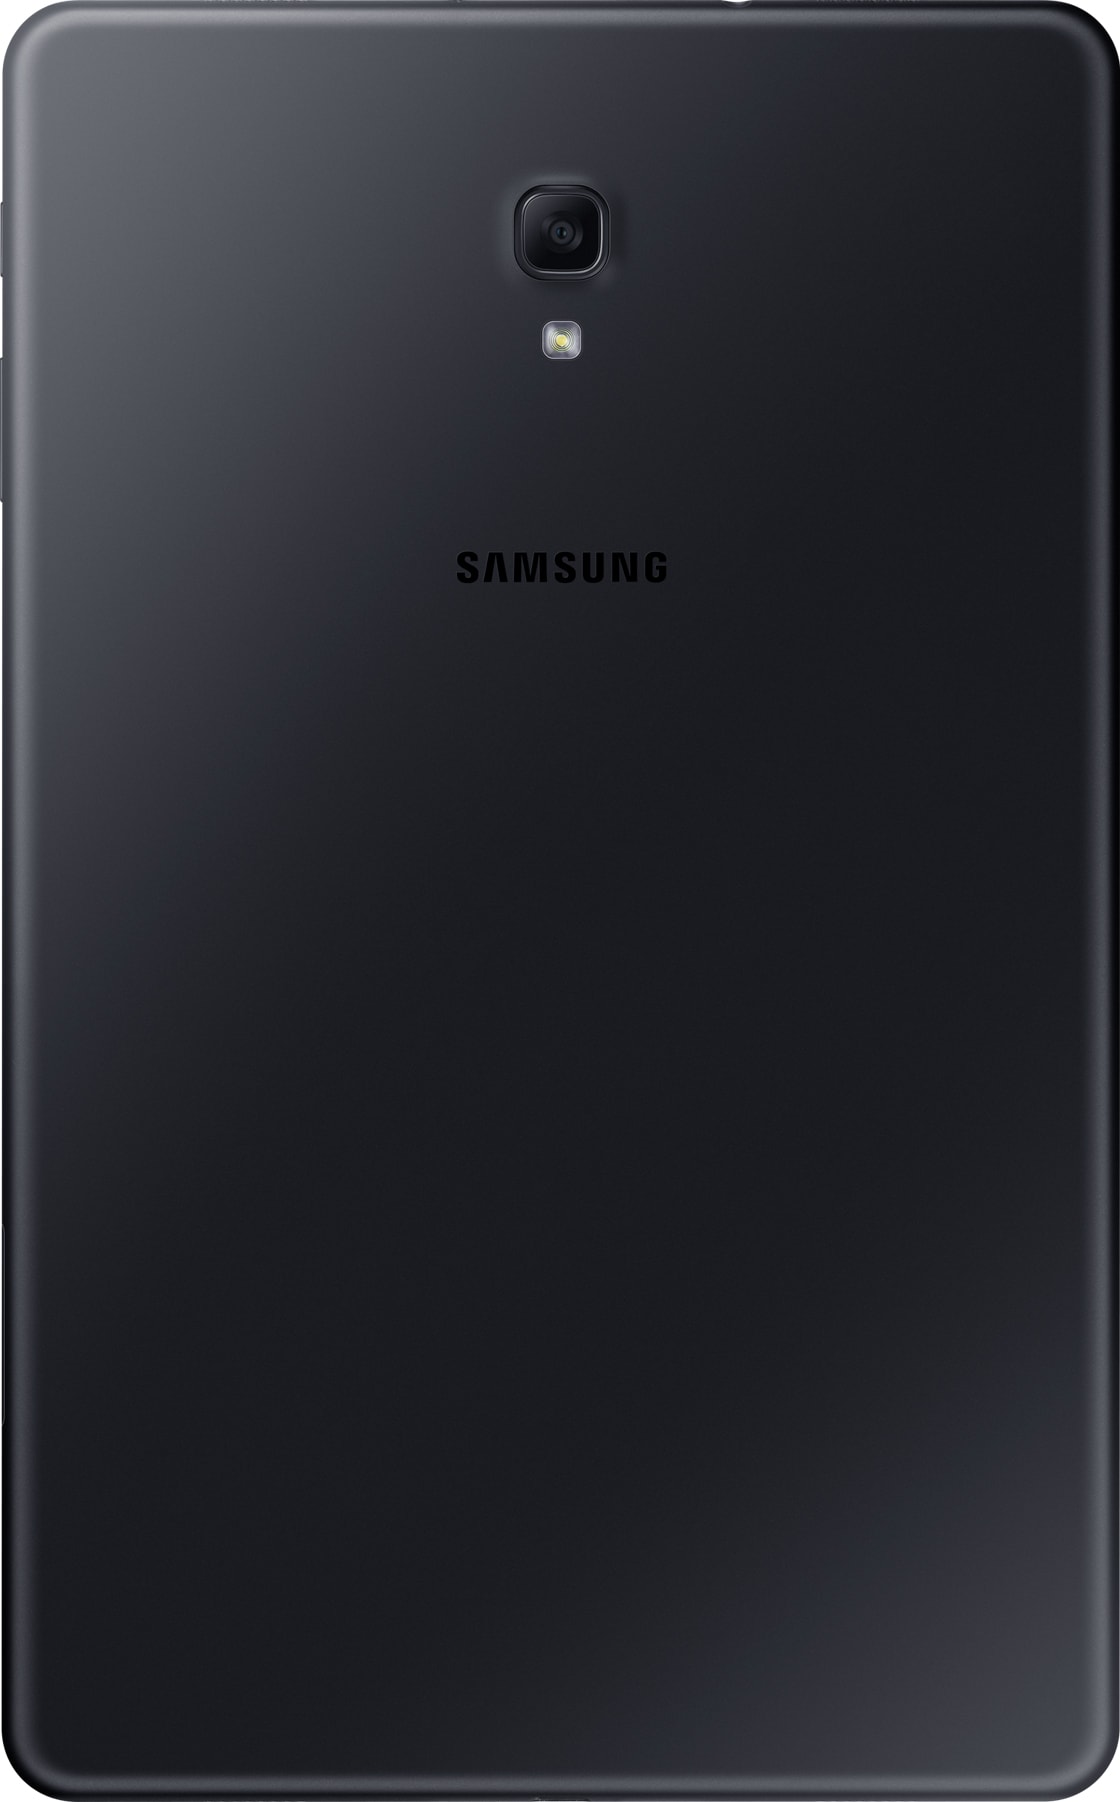 Samsung Tablette Android Galaxy Tab A8 4G 32Go Anthracite pas cher 